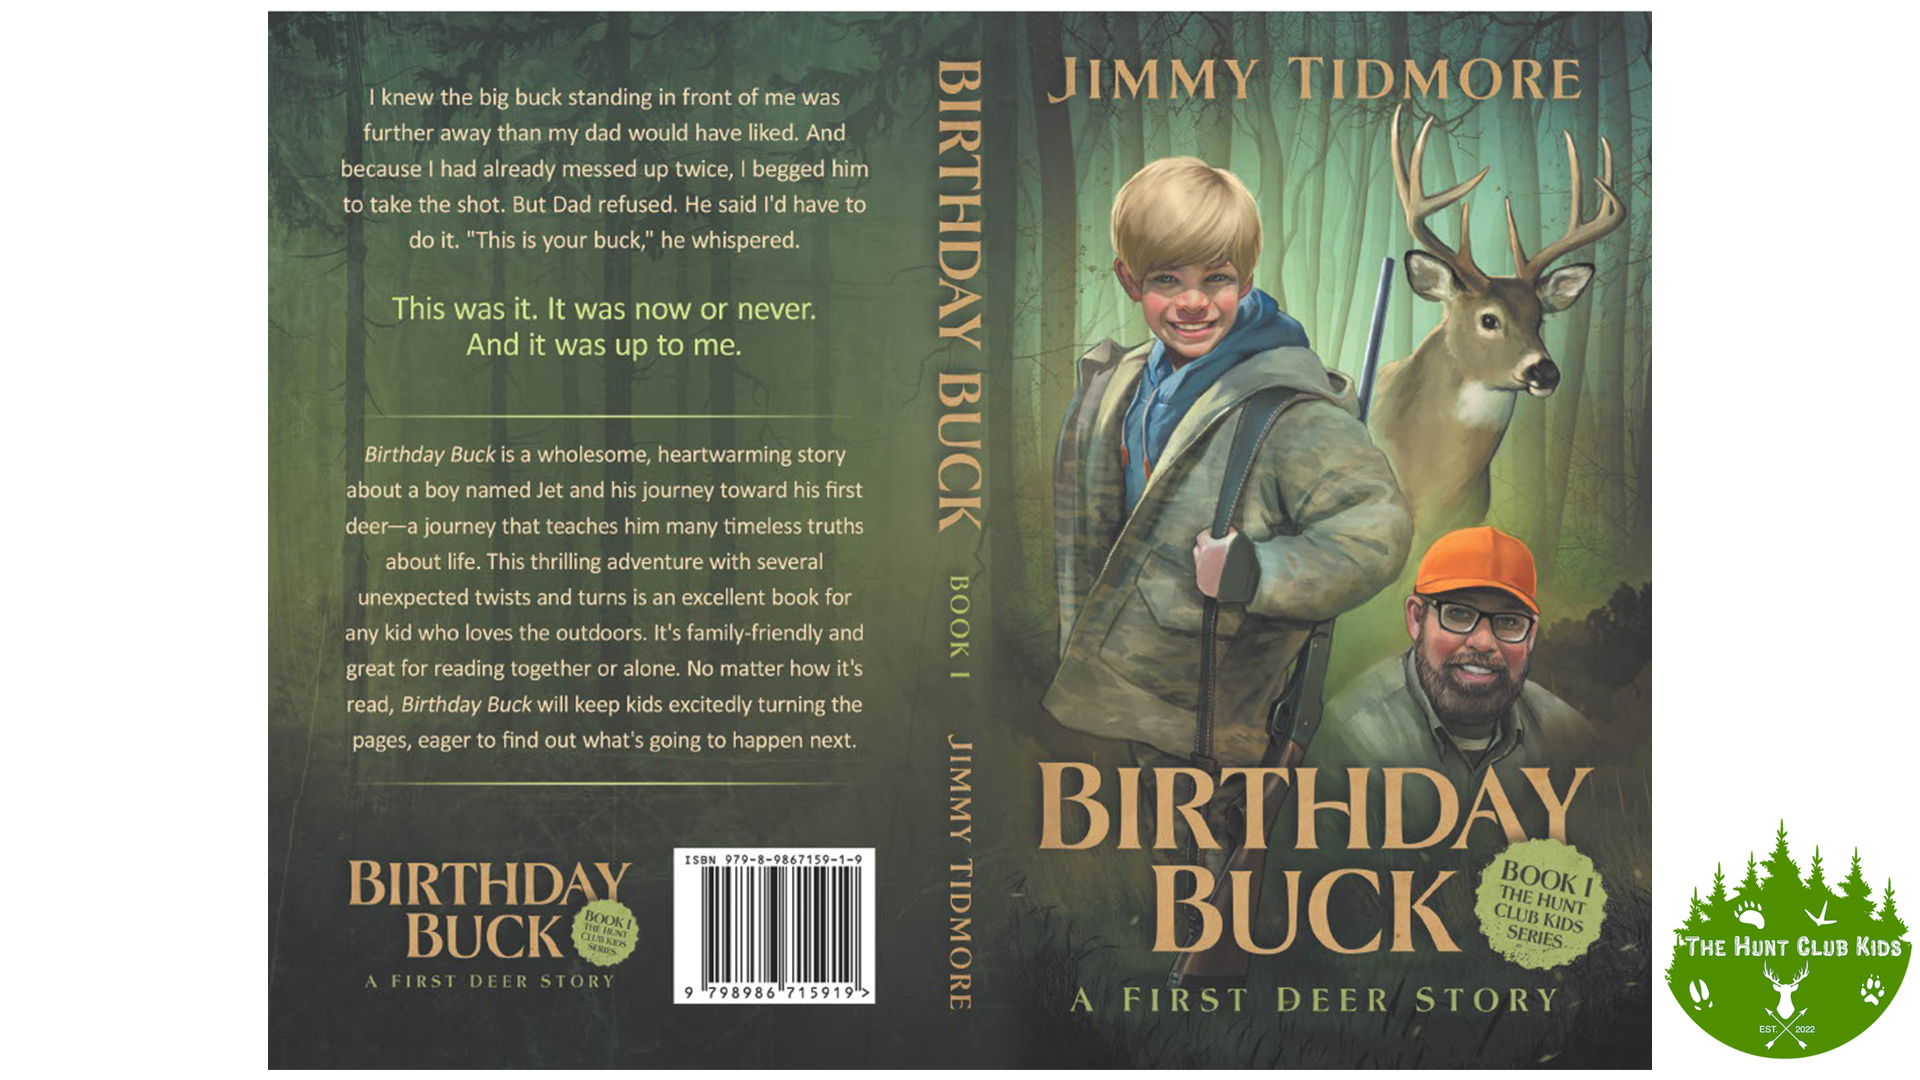 alabama Pastor And Hunter Introduces First In New Series Of Children’s Hunting Books